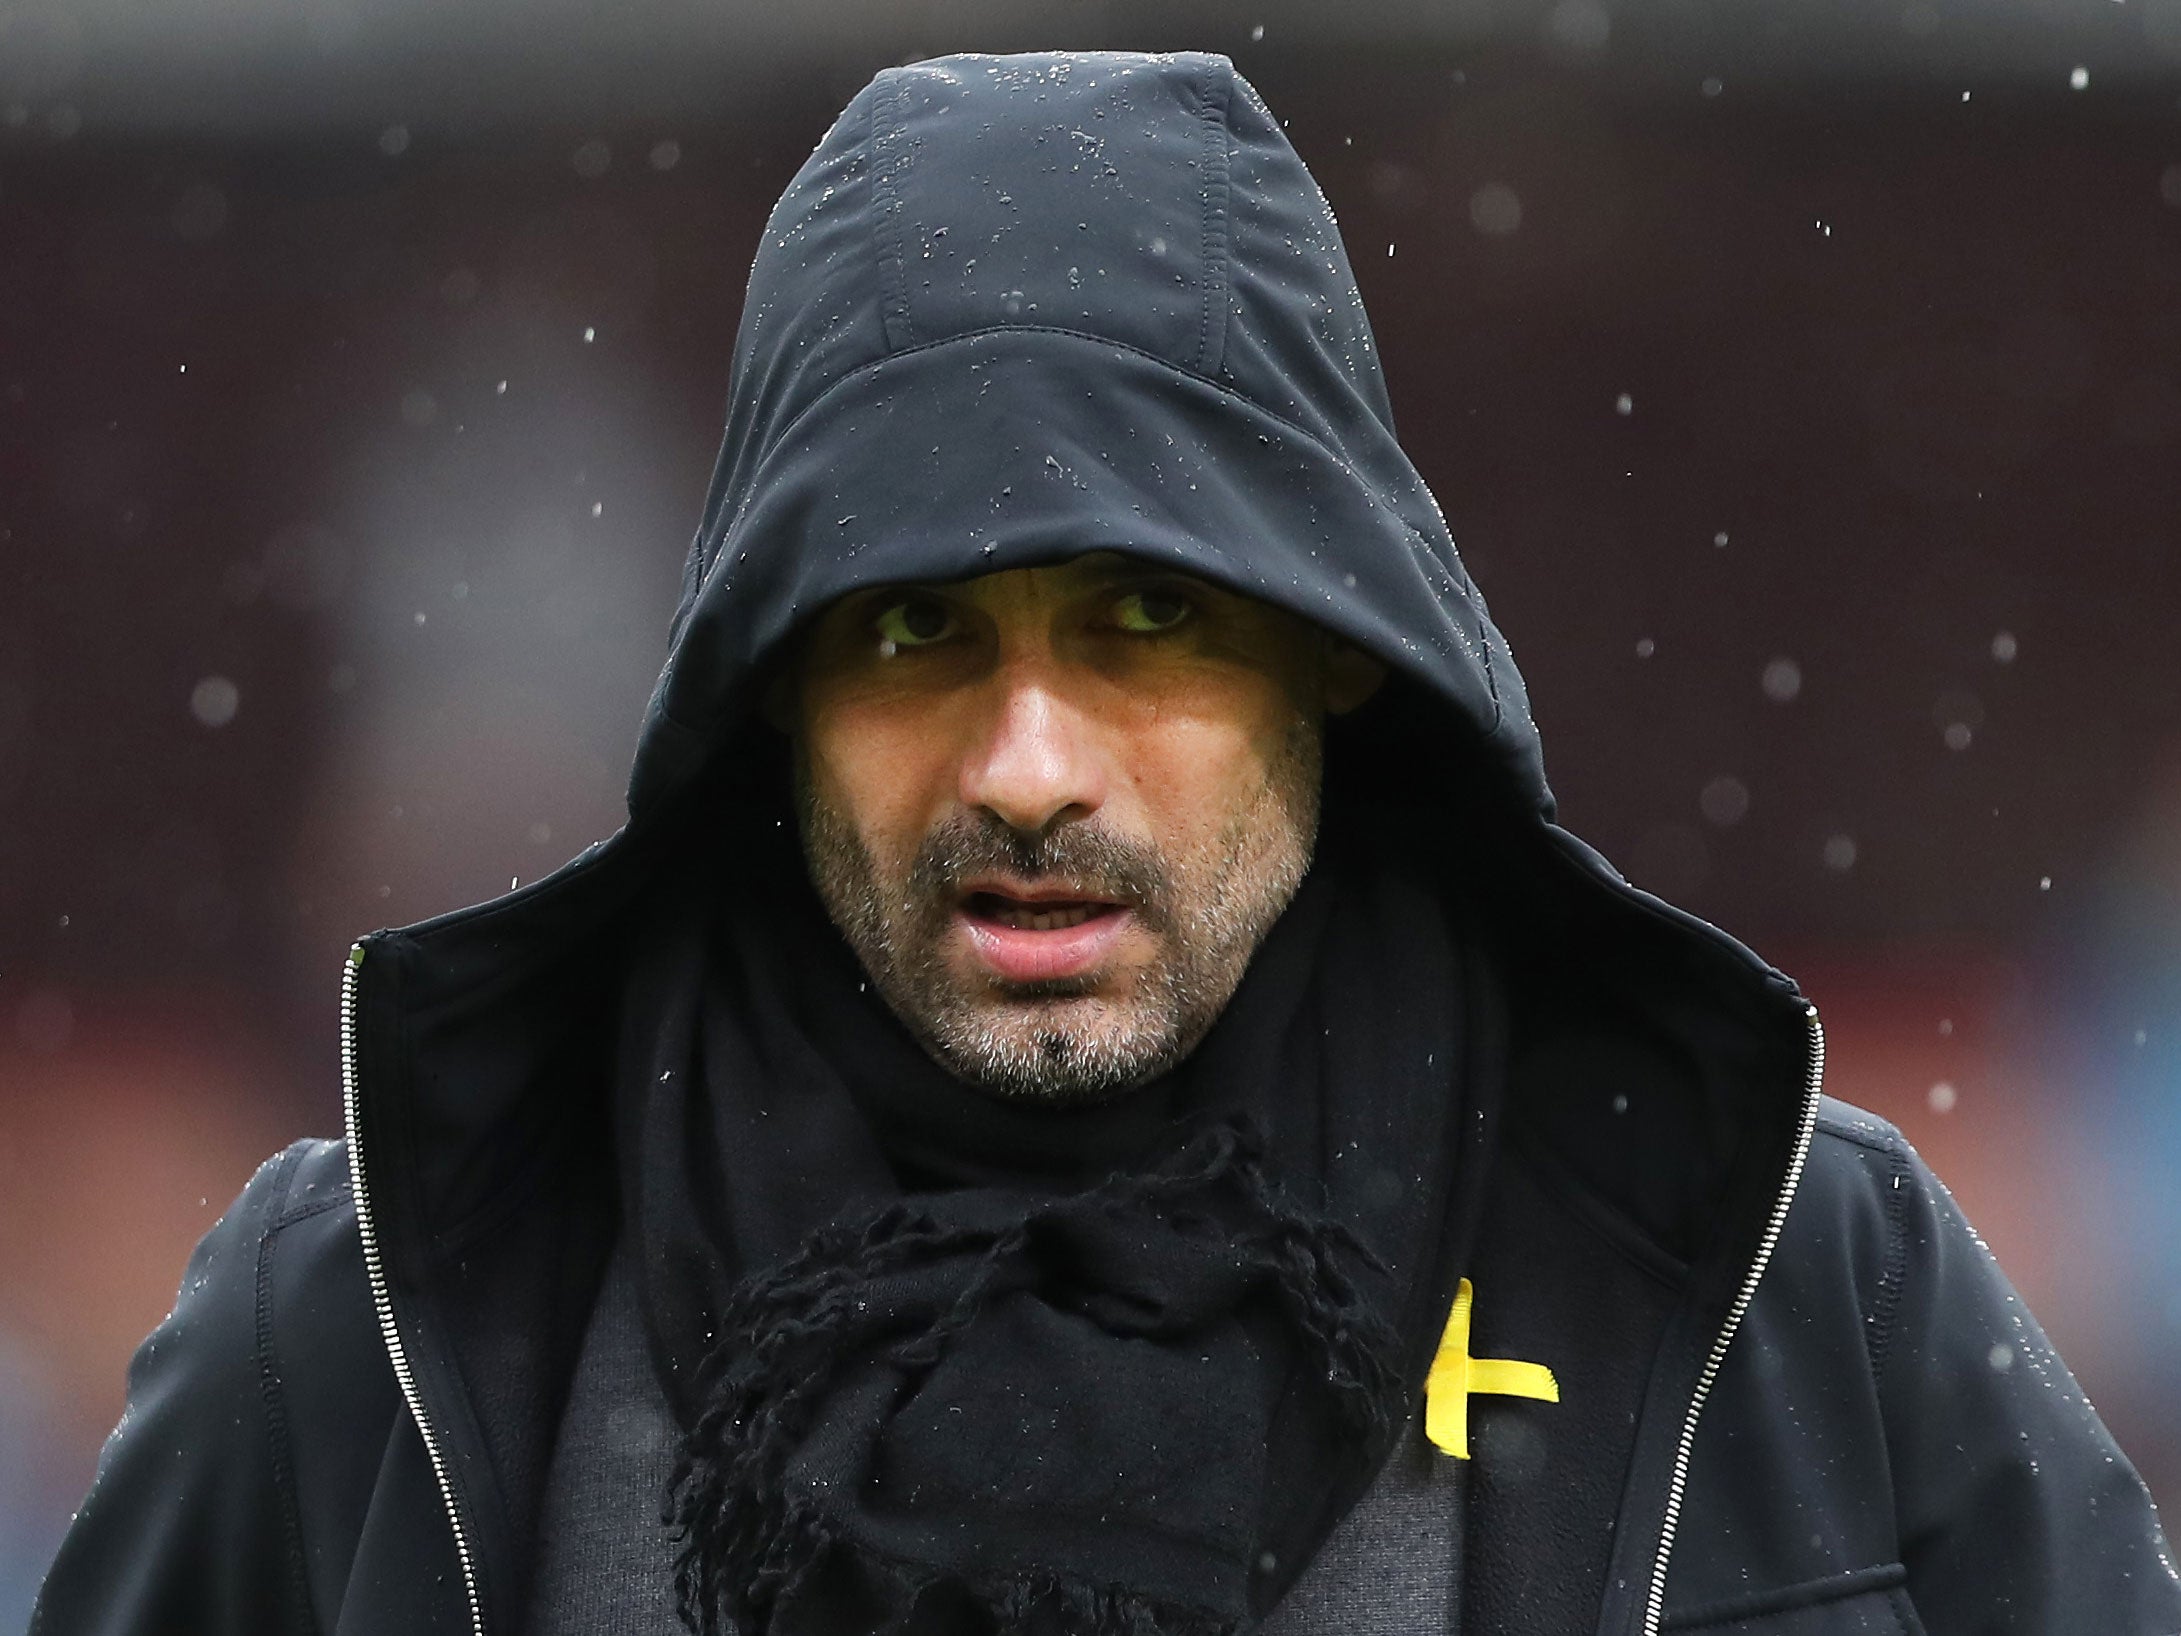 Pep Guardiola has worn the ribbon in support of Catalonian political prisoners